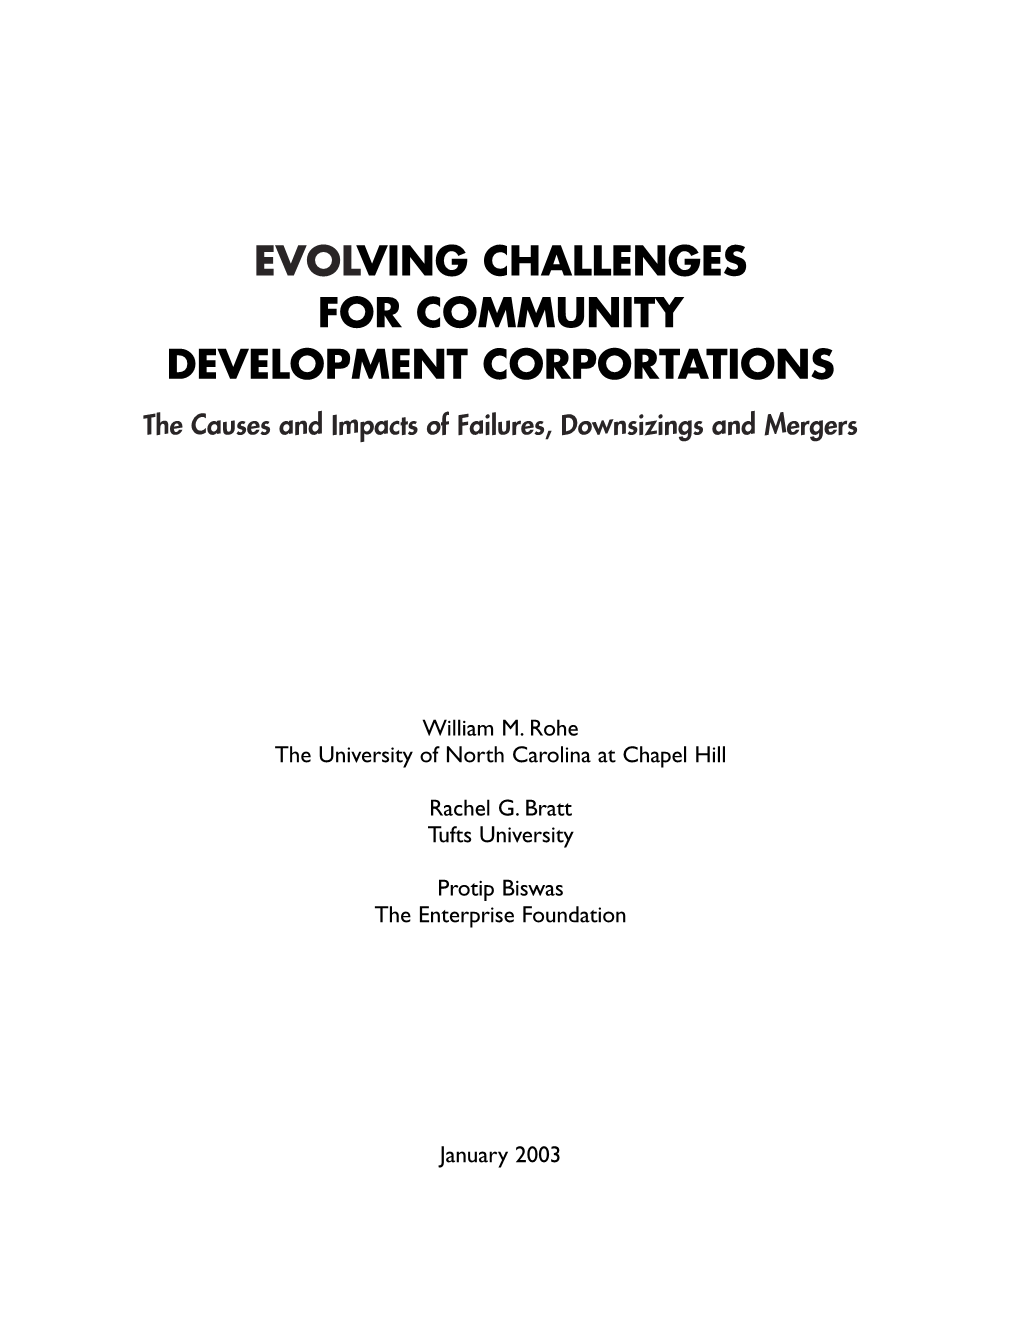 Evolving Challenges for Community Development Corporations:The Causes and Impacts of Failures, Downsizings,And Mergers